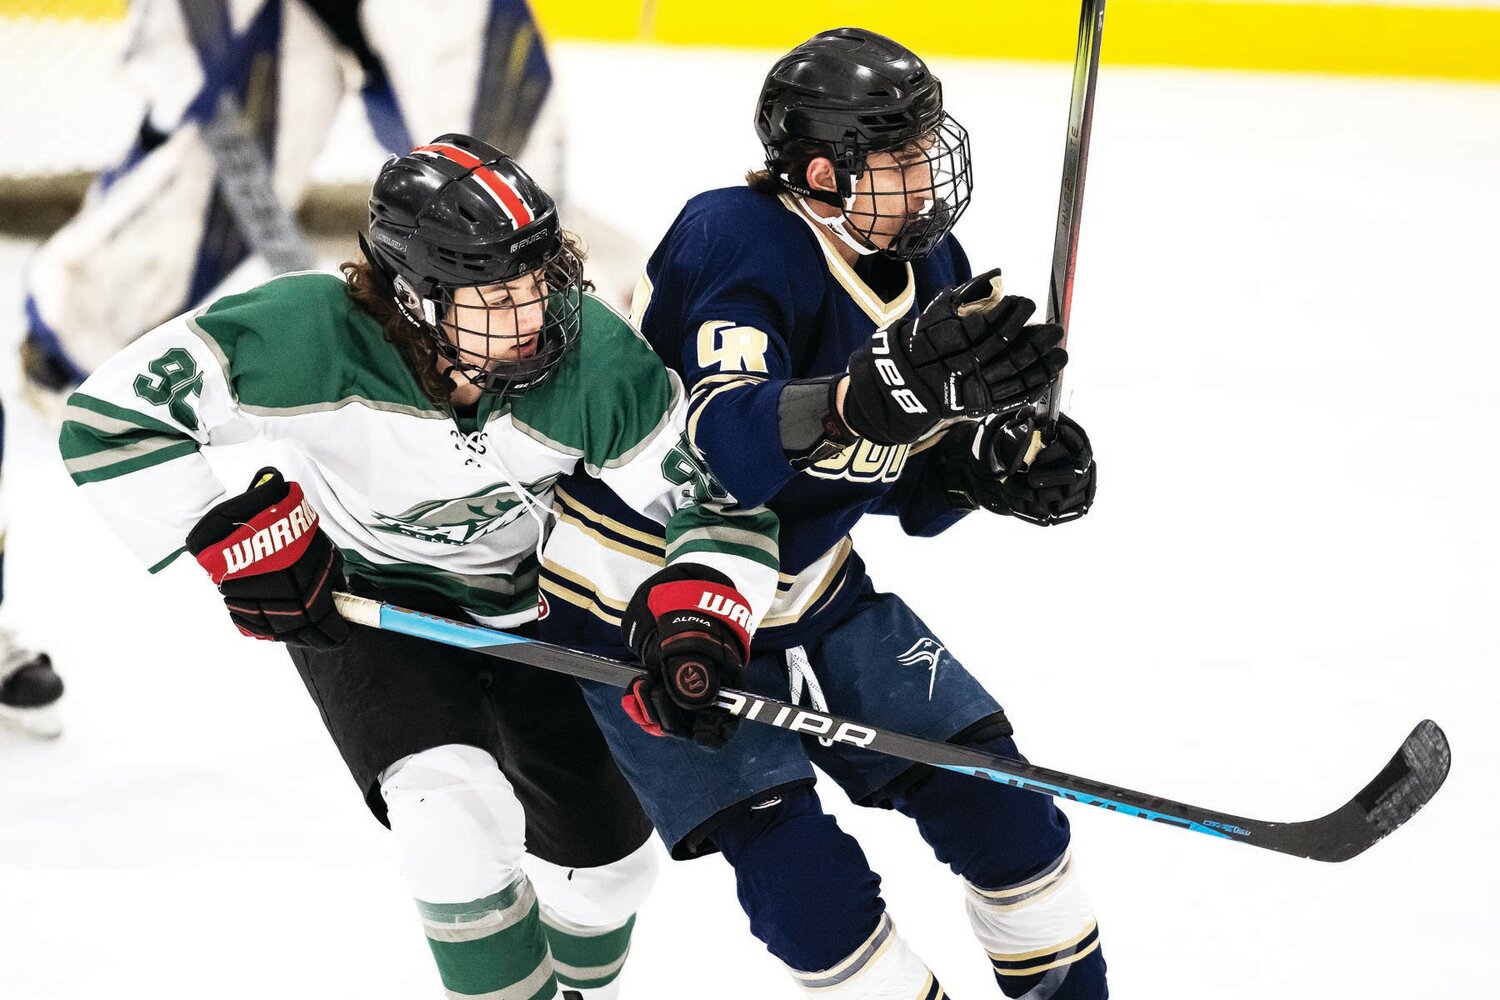 Pennridge’s Nicholas Young and Council Rock South’s Blaize Pepe cross paths going for a loose puck in the first period.